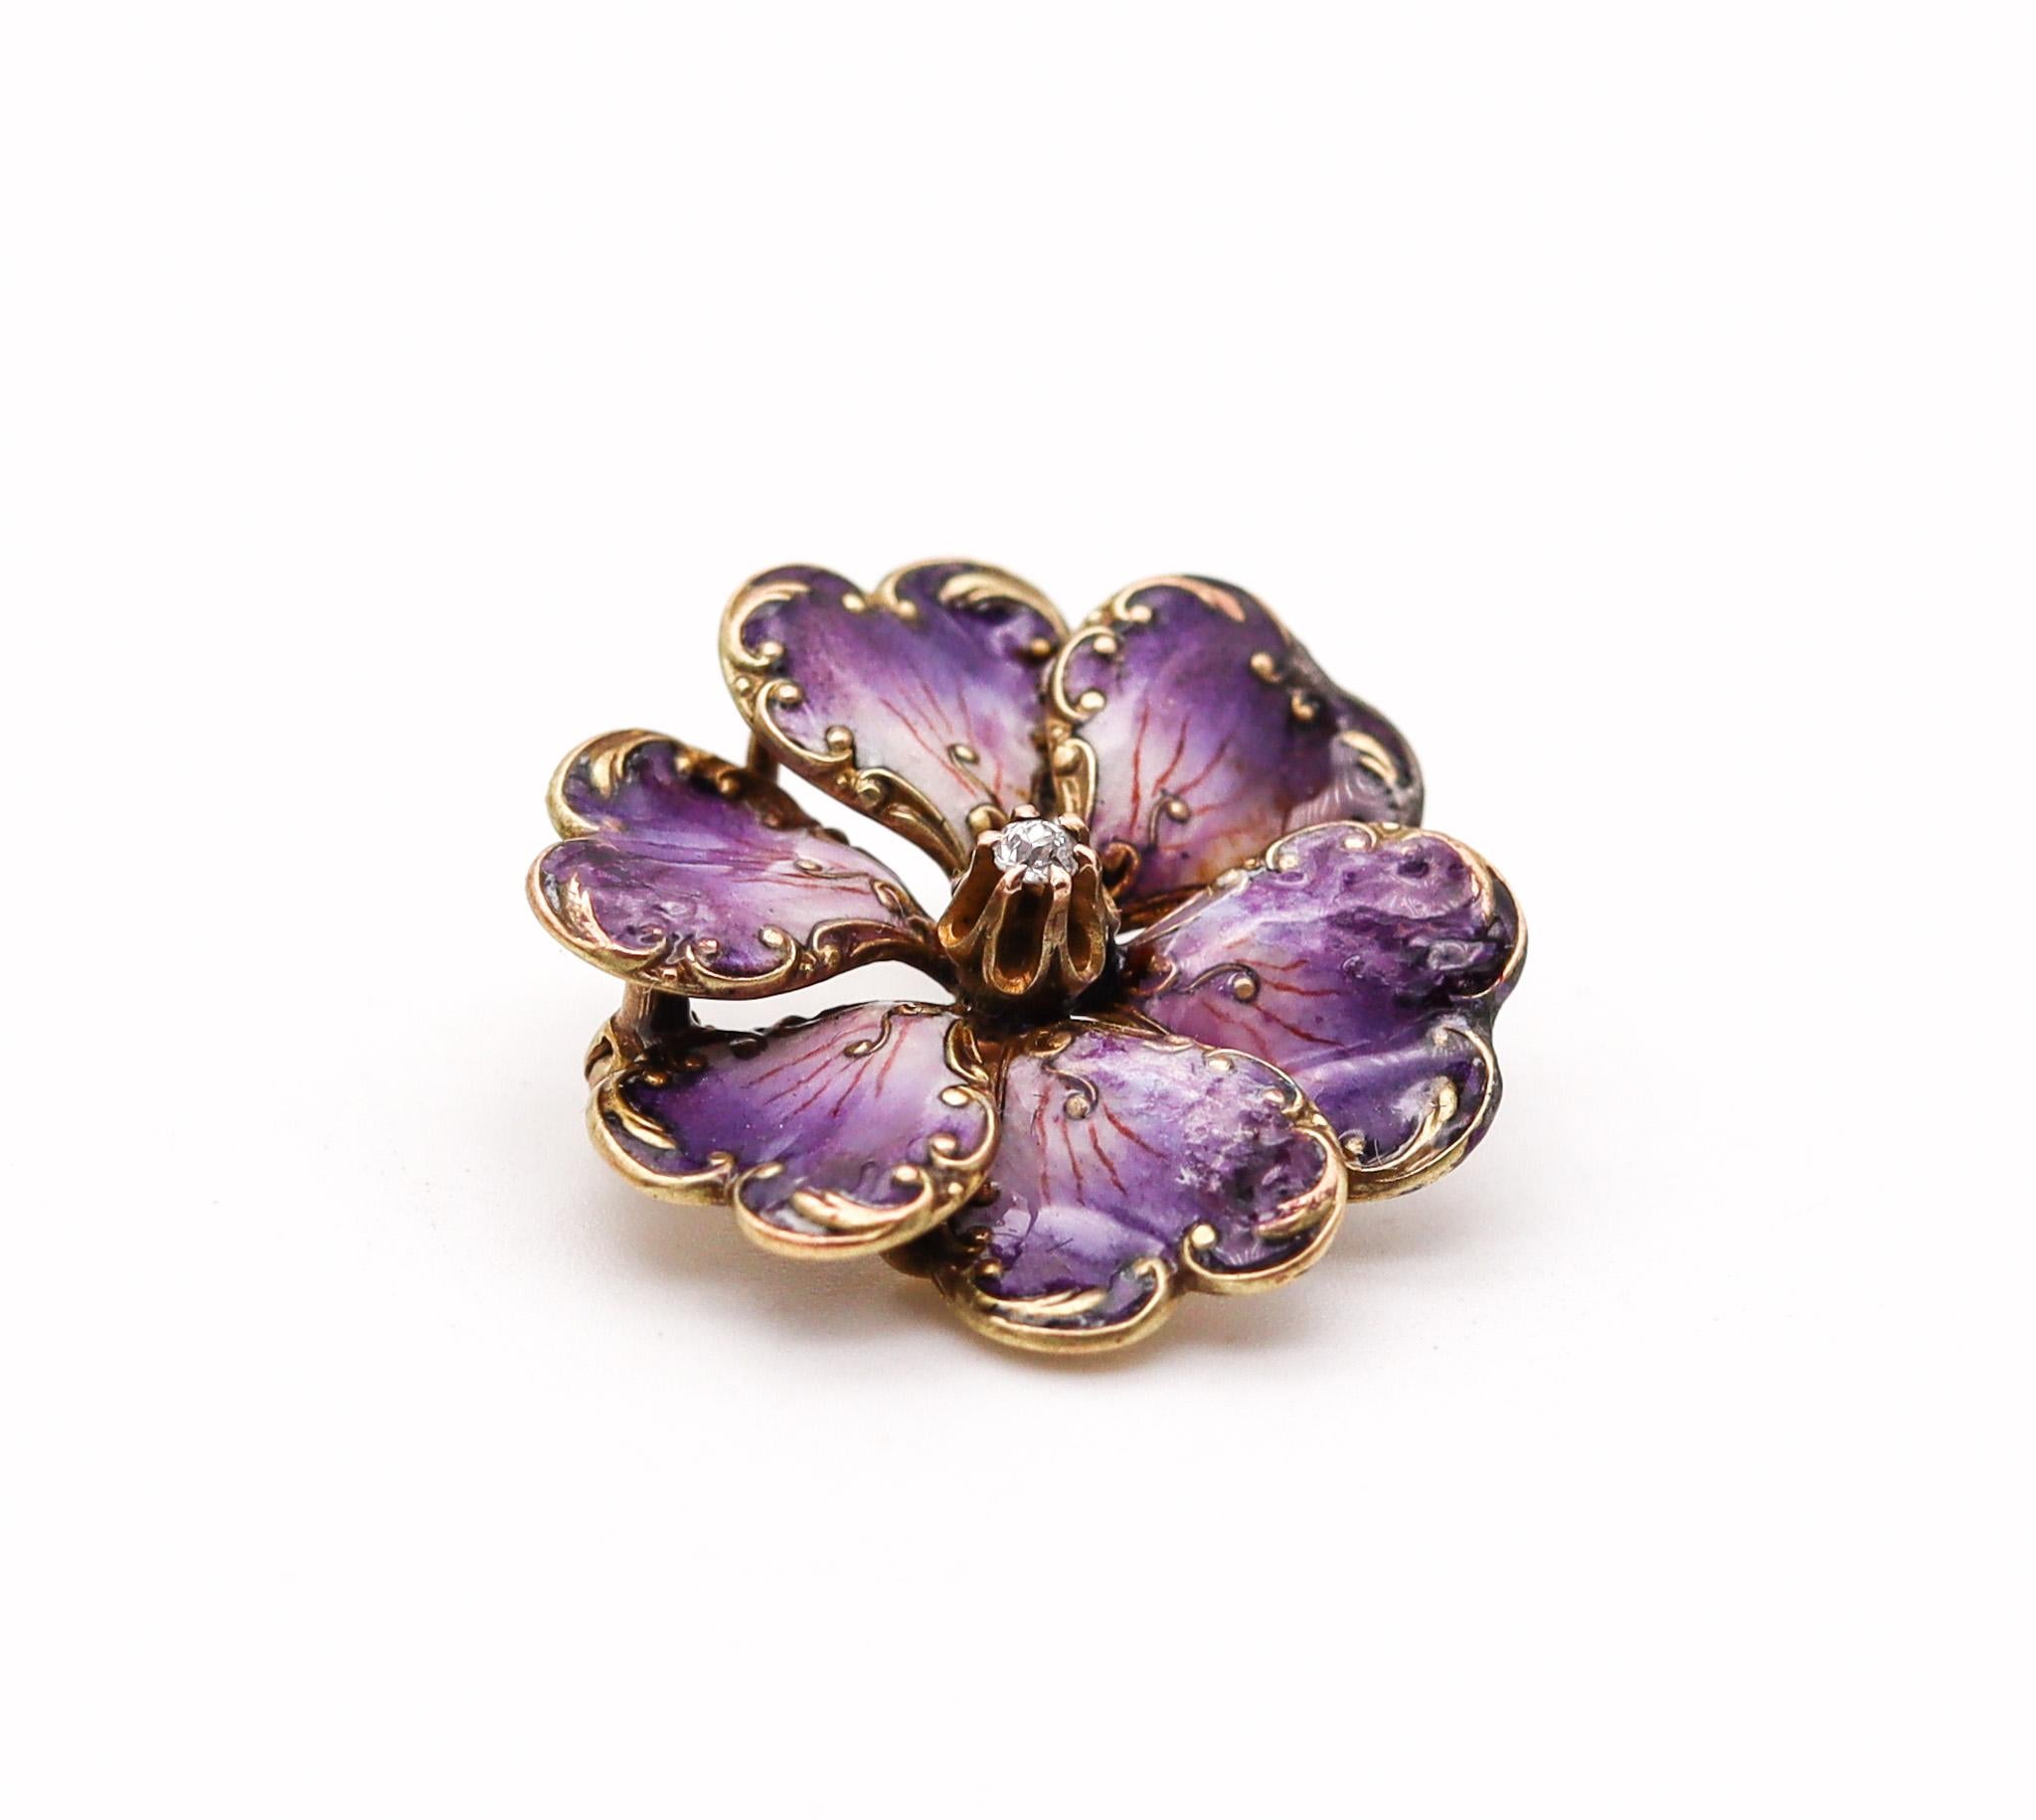 Edwardian enameled purple flower brooch.

Beautiful three-dimensional piece, created in America during the Edwardian and the Art Nouveau periods, back in the 1901-1910. This beautiful pin brooch has been carefully crafted in solid yellow gold of 14